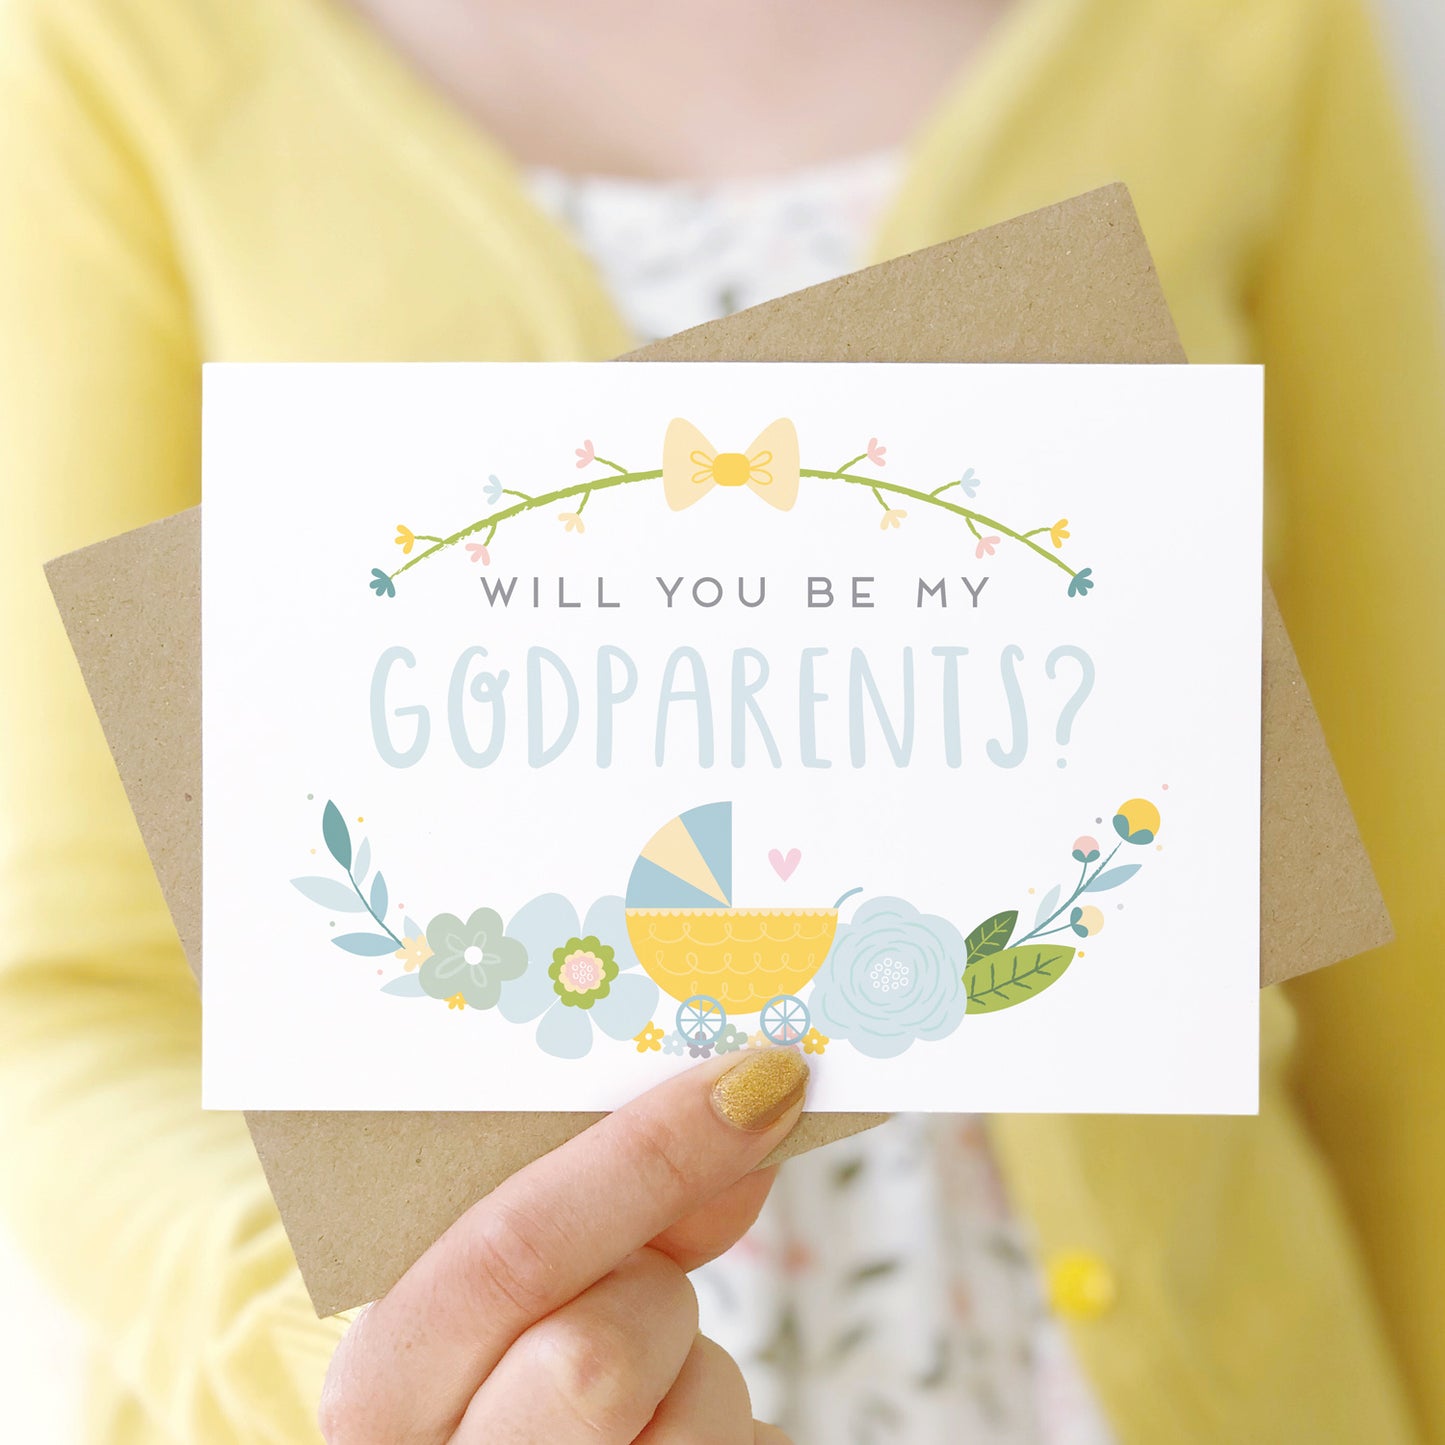 A will you be my godparents card being held in front of a white dress and yellow cardigan. The design features a pram, simple florals and the all important question. This is the blue palette.